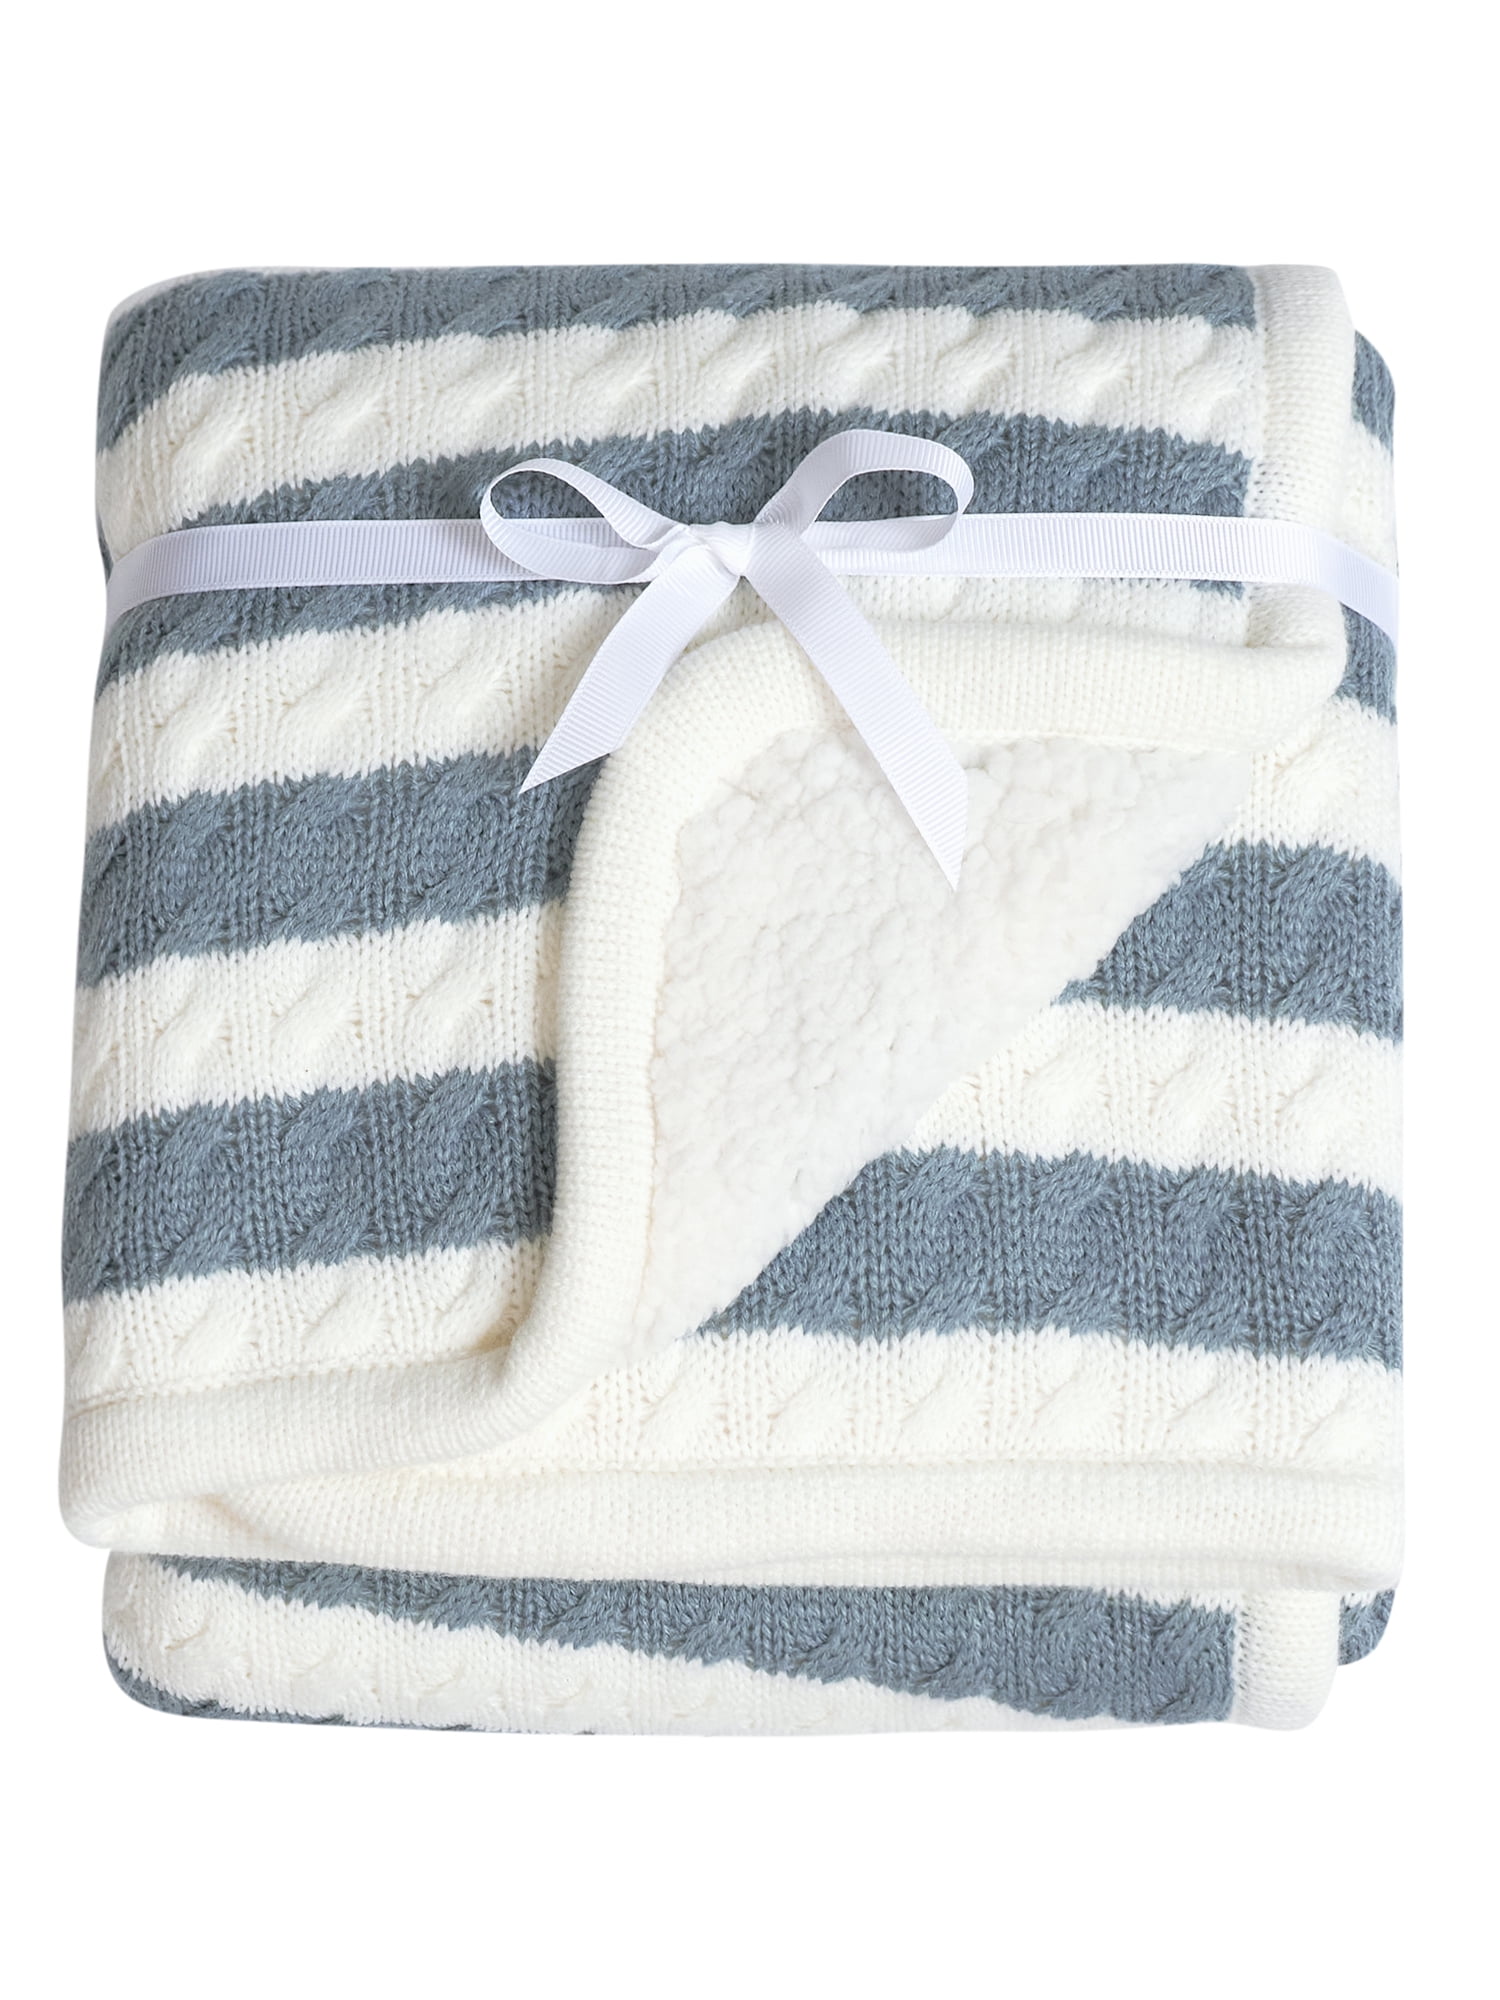 Modern Moments by Gerber Baby Boy or Girl Cable Knit Blanket with Sherpa, Blue Stripes